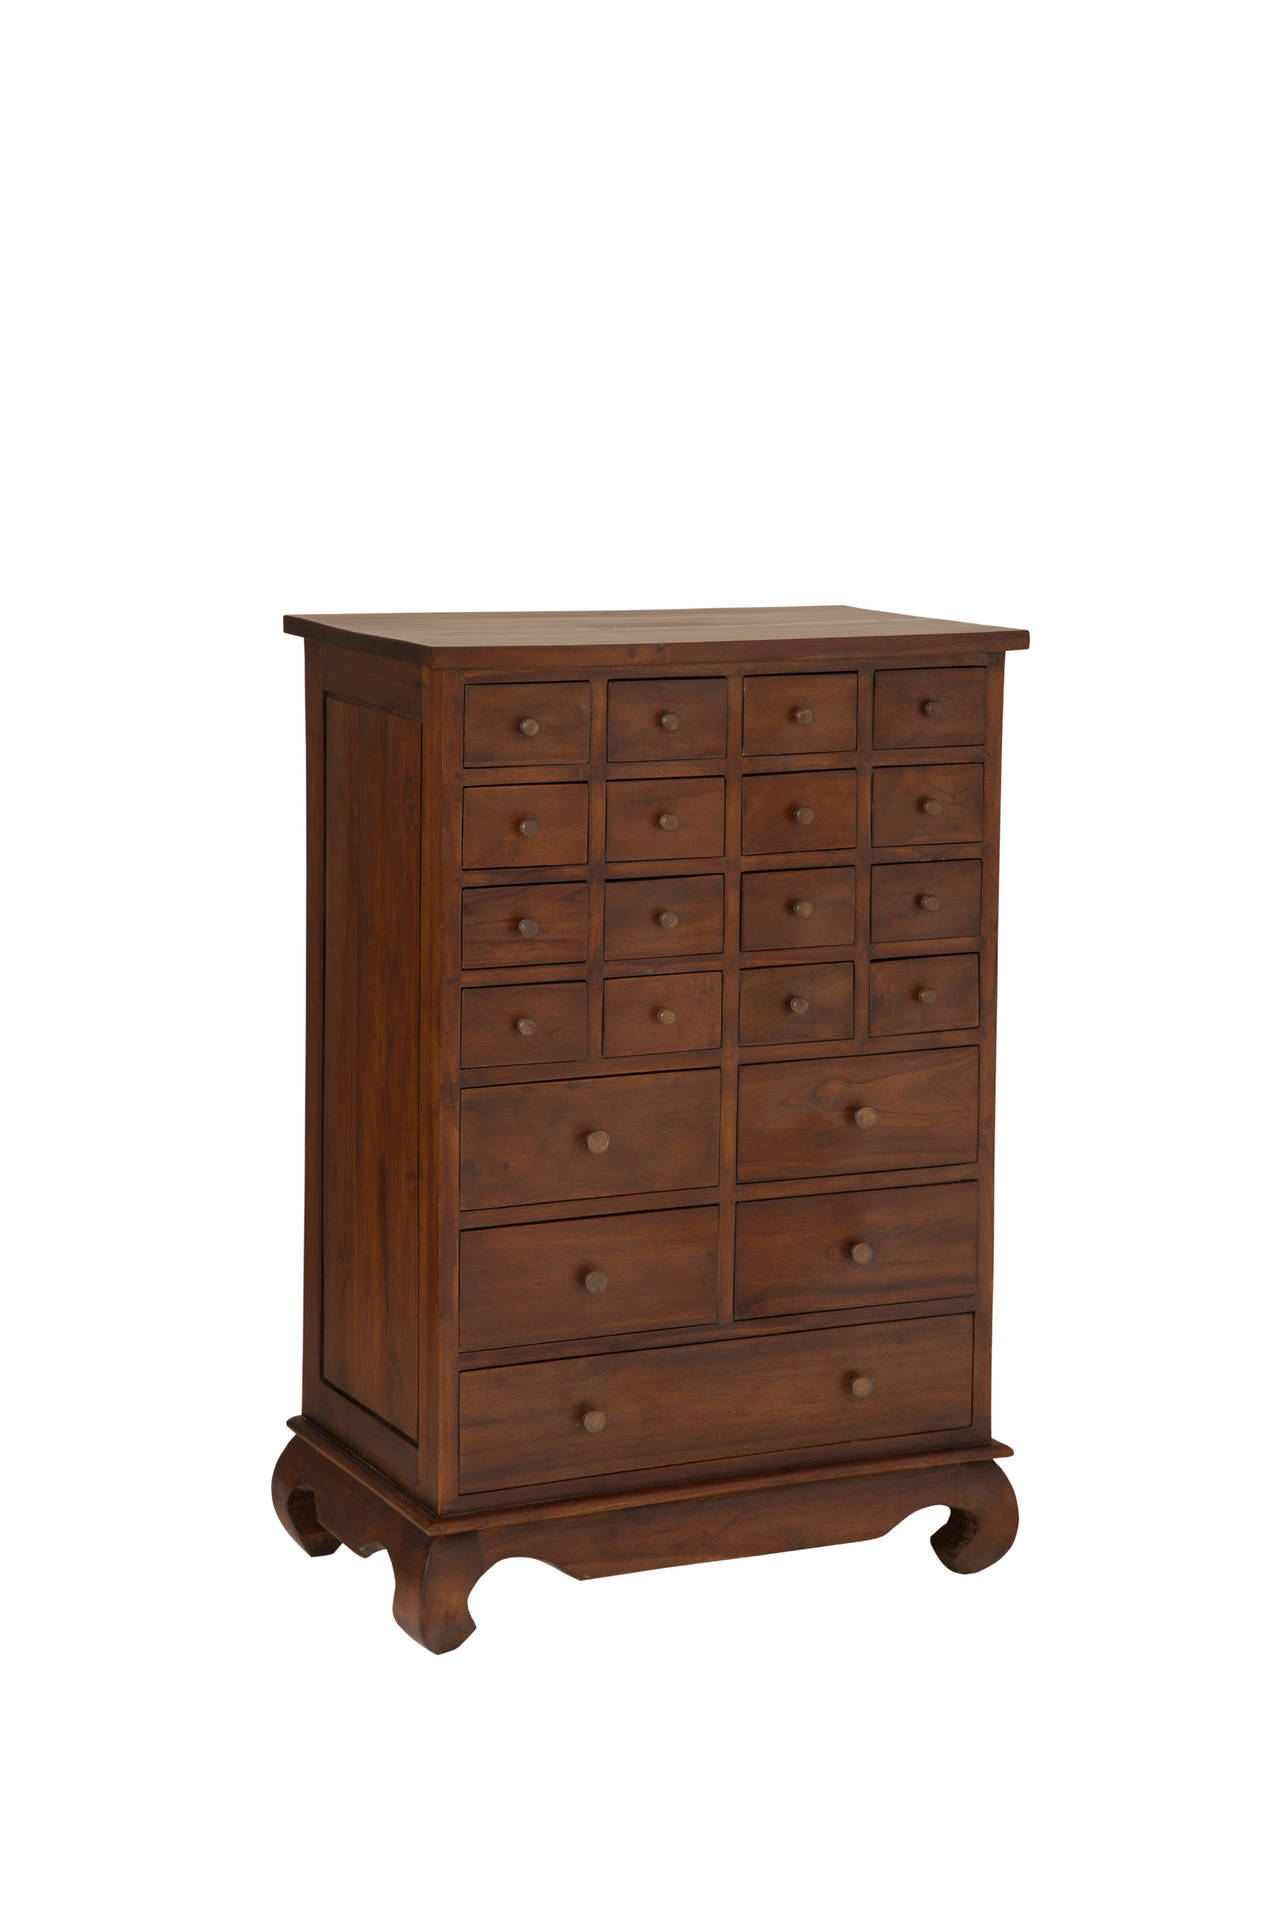 OPIUM CHEST MANY DRAWERS